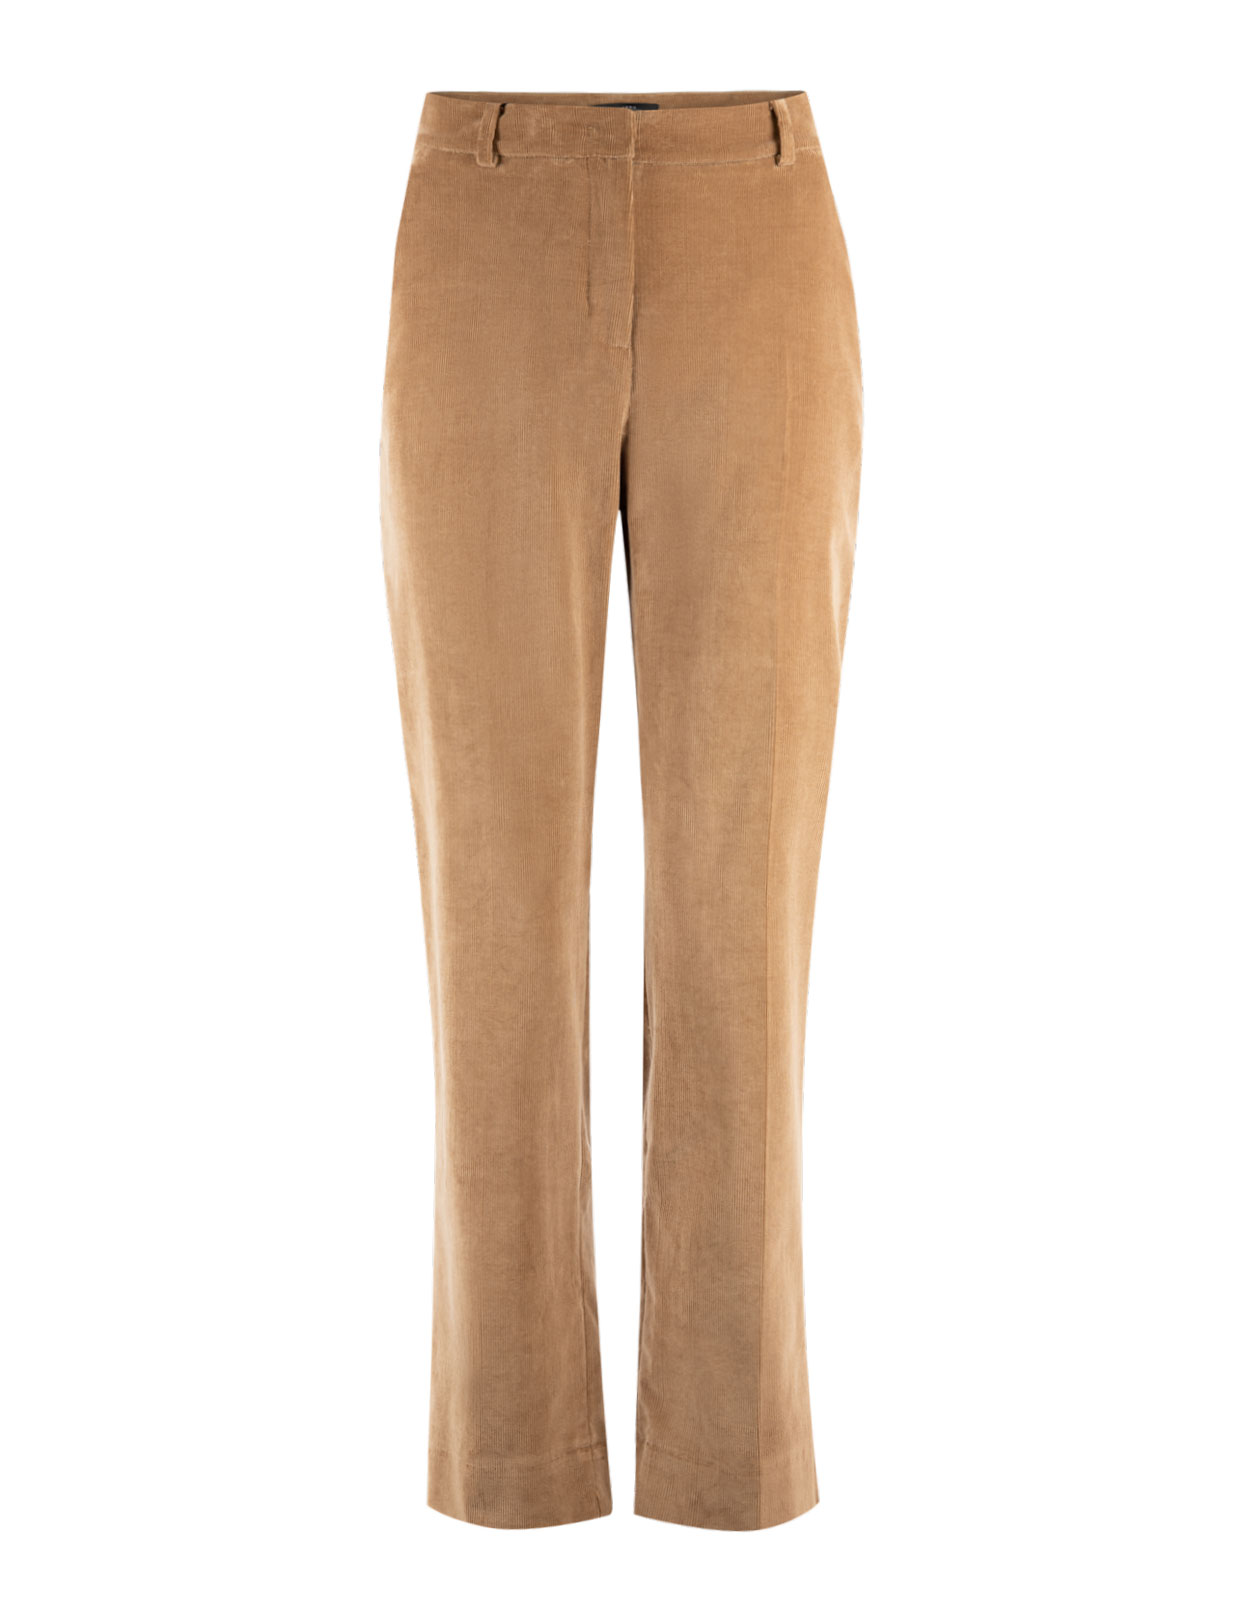 Fungo Cropped Cord Camel